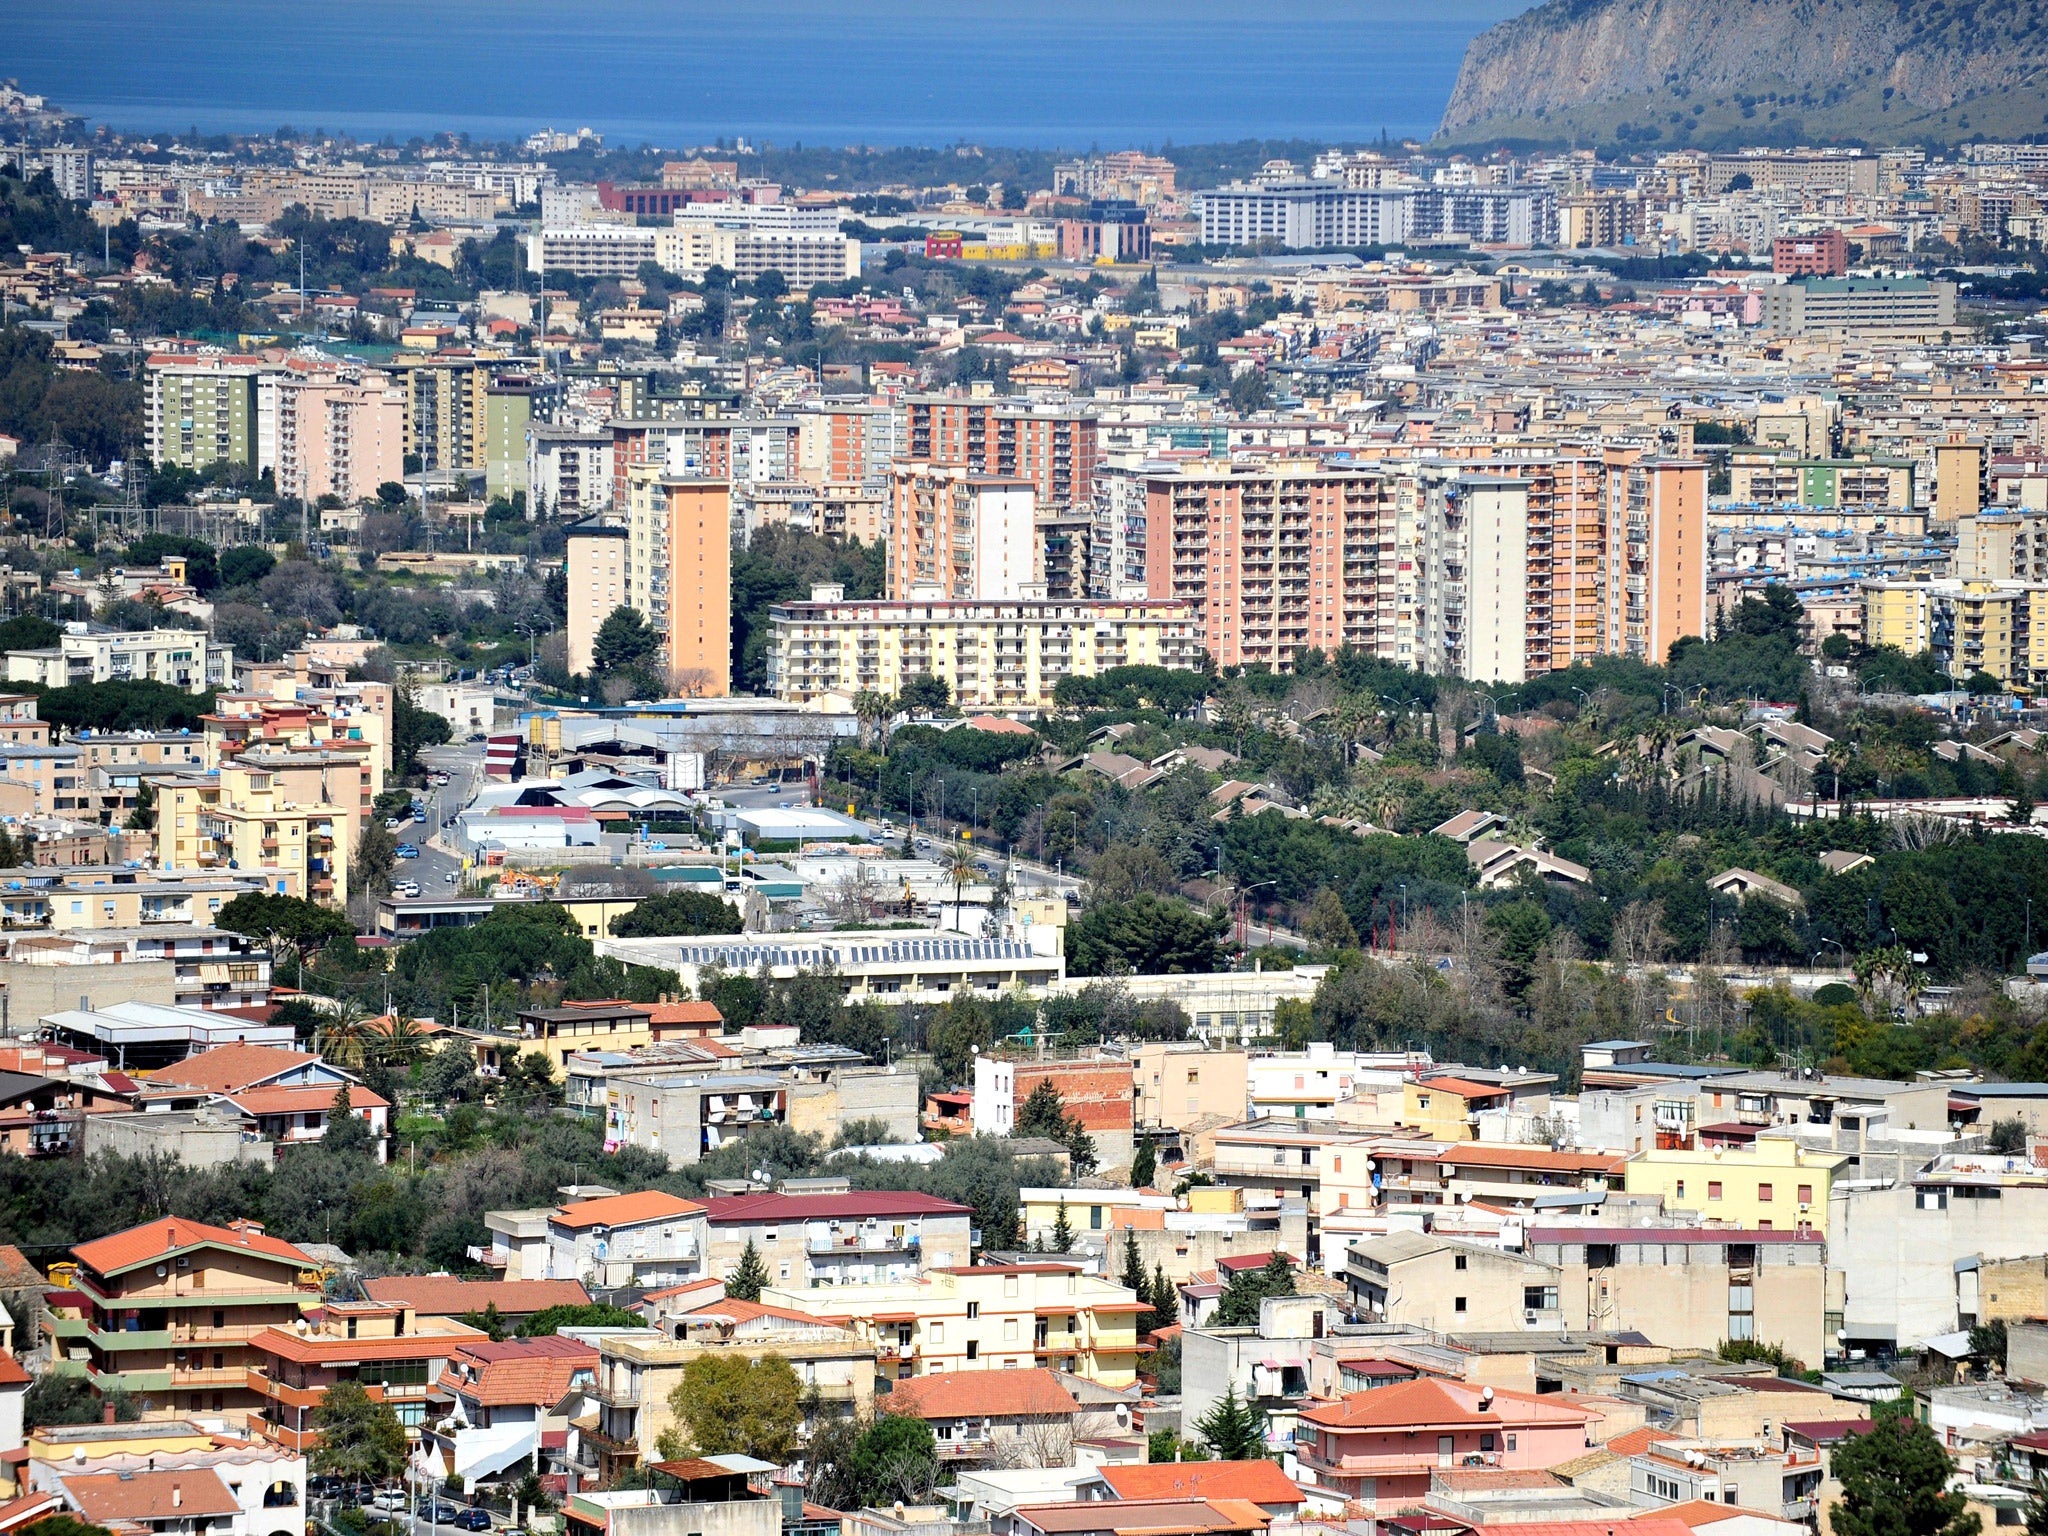 Palermo’s Noce clan are based in the centre of the Sicilian capital